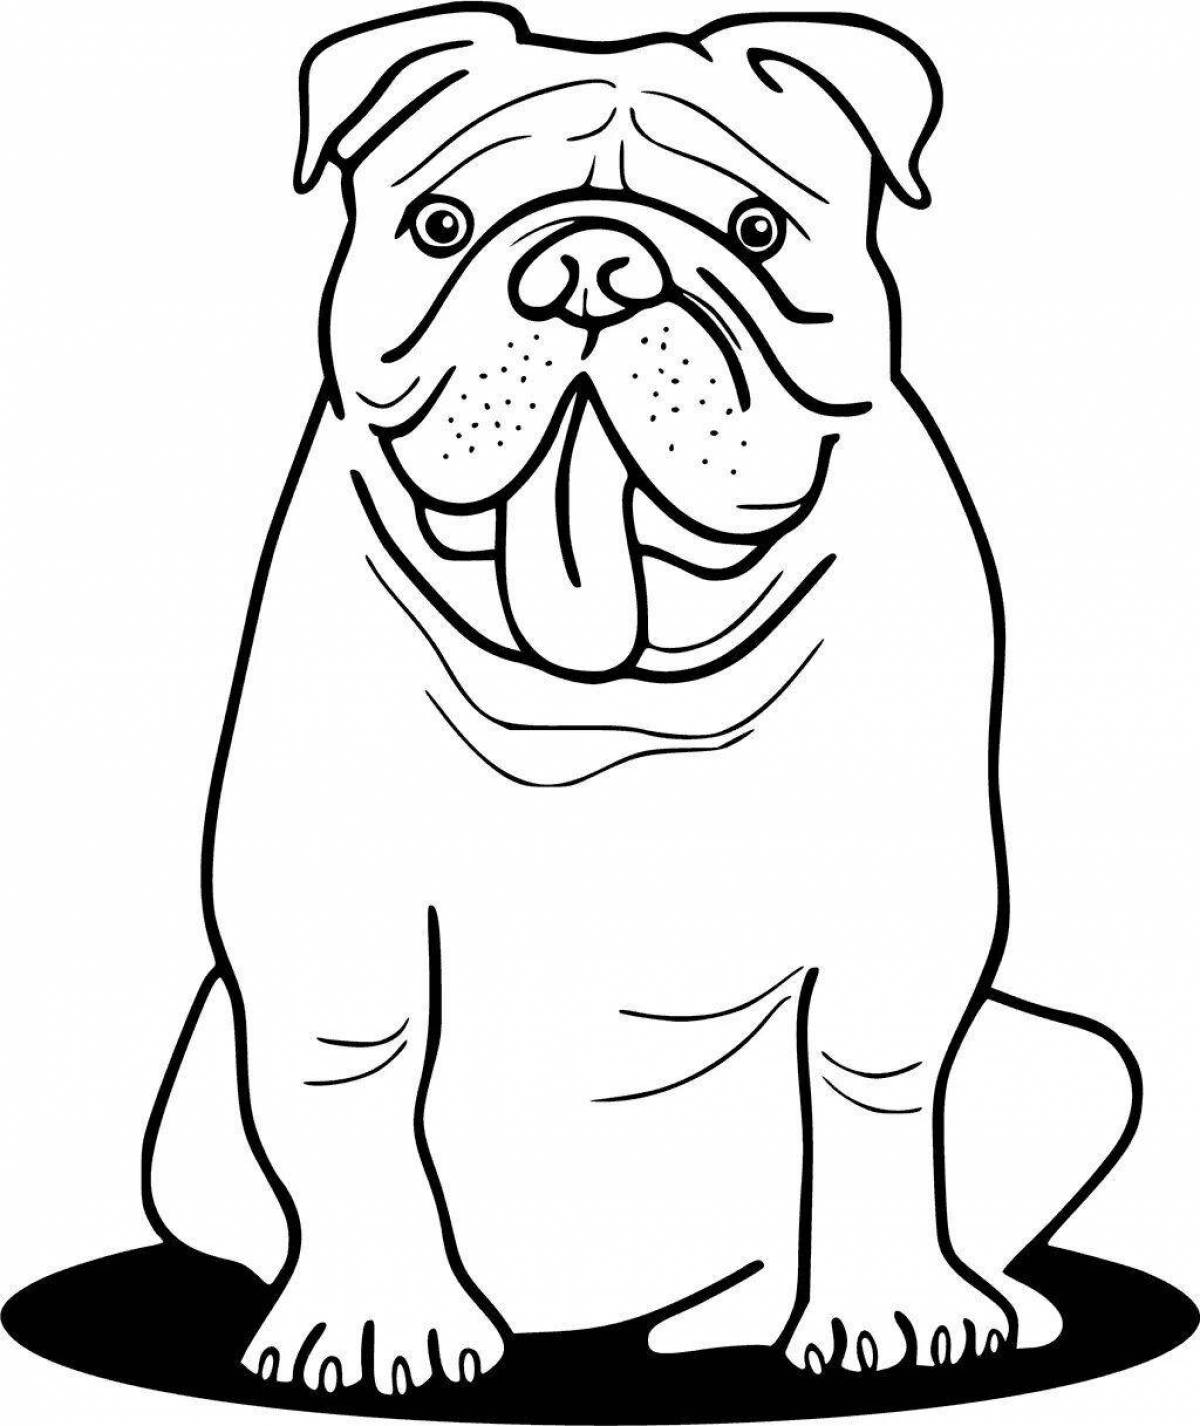 Sweet bulldog coloring page for kids